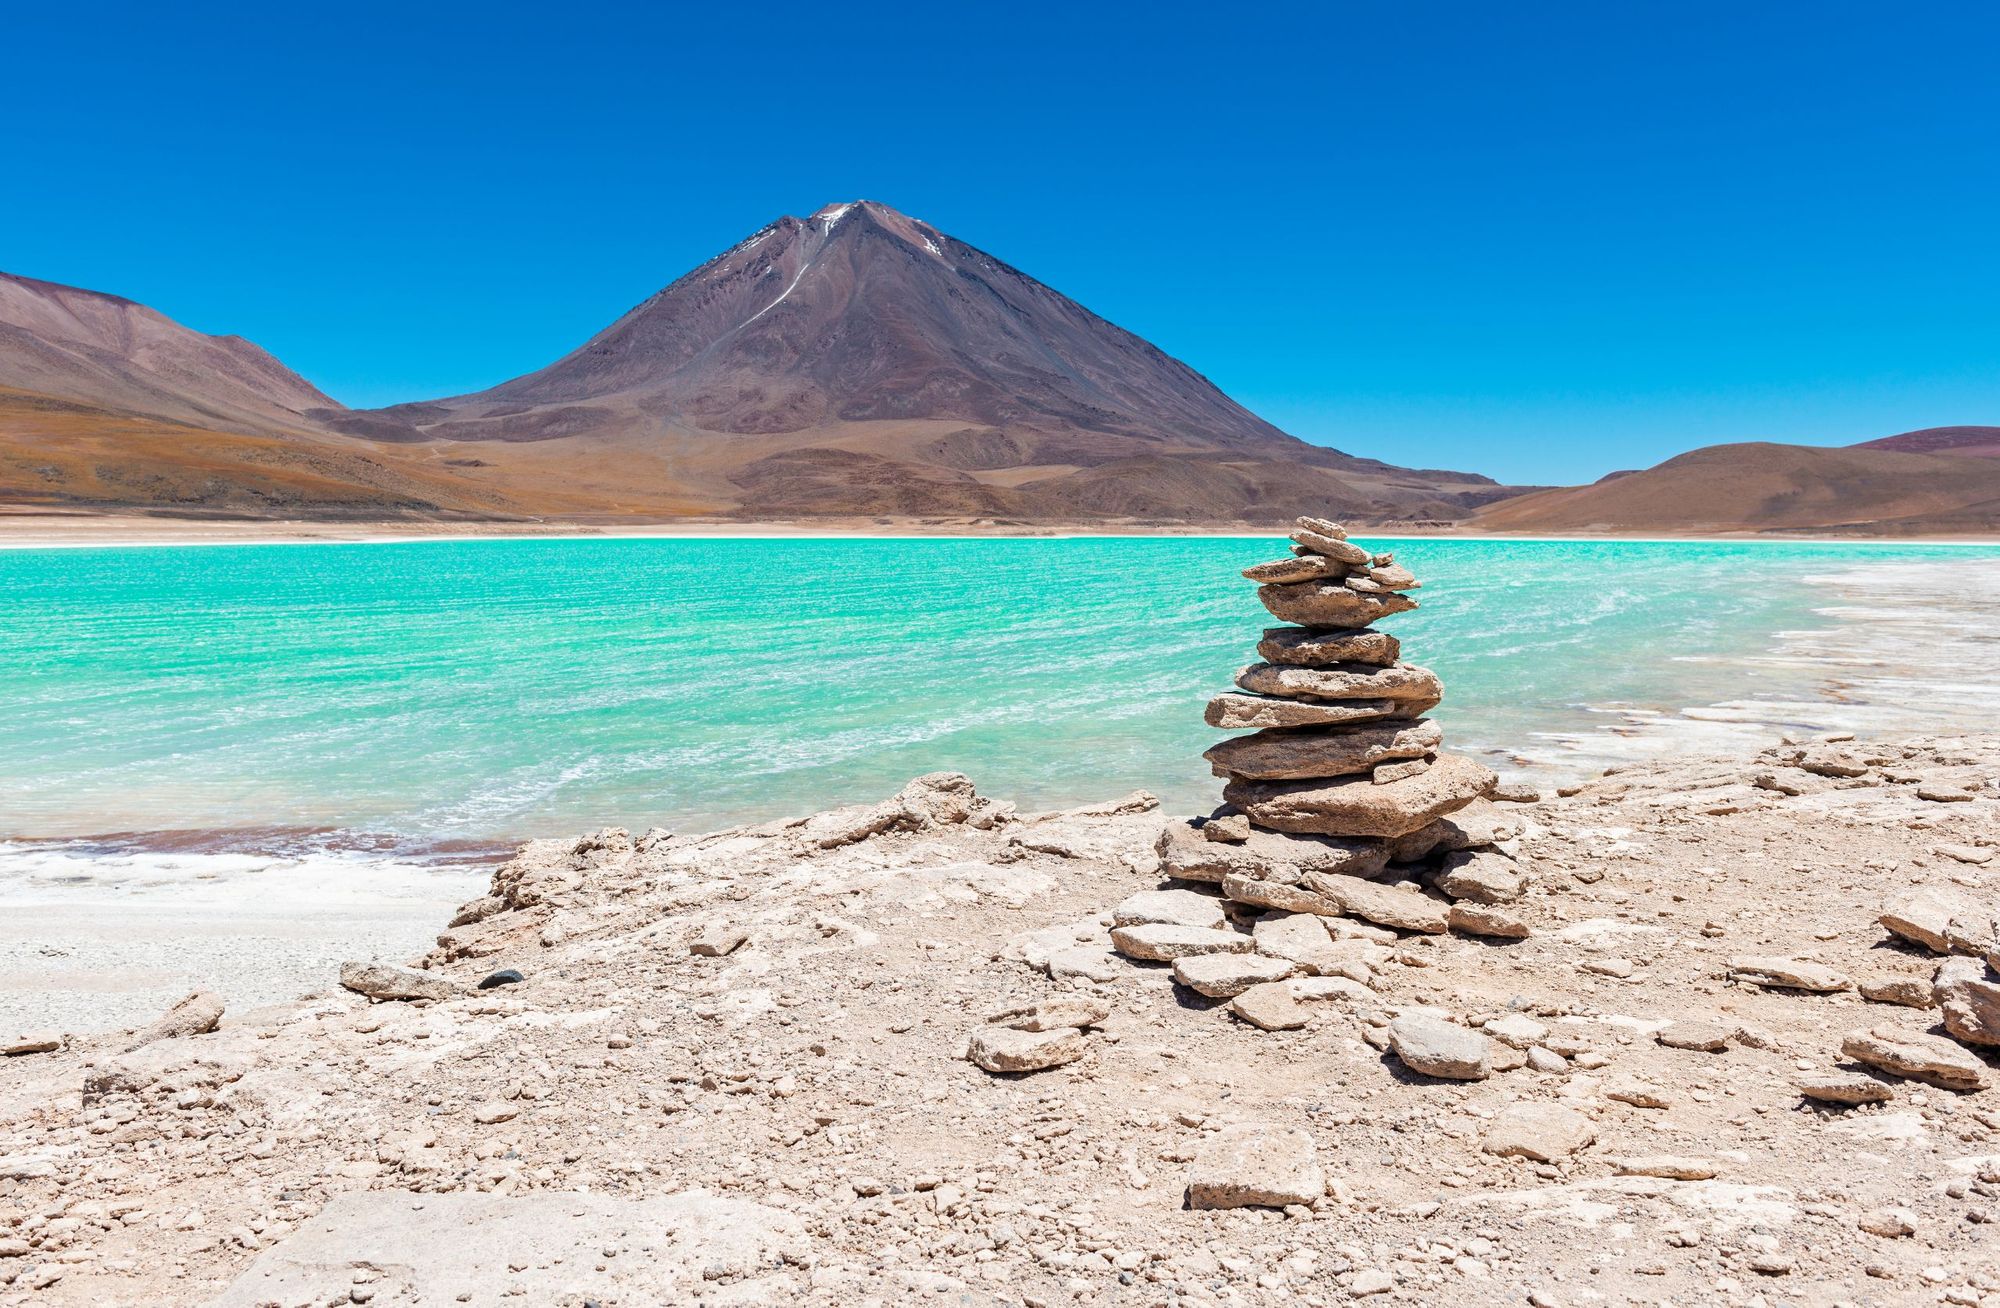 The vivid blue waters of Lagnuas Verde, which lies just below Volcan Licancabur on the Altiplano Traverse, a long distance hike in South America. Photo: Getty